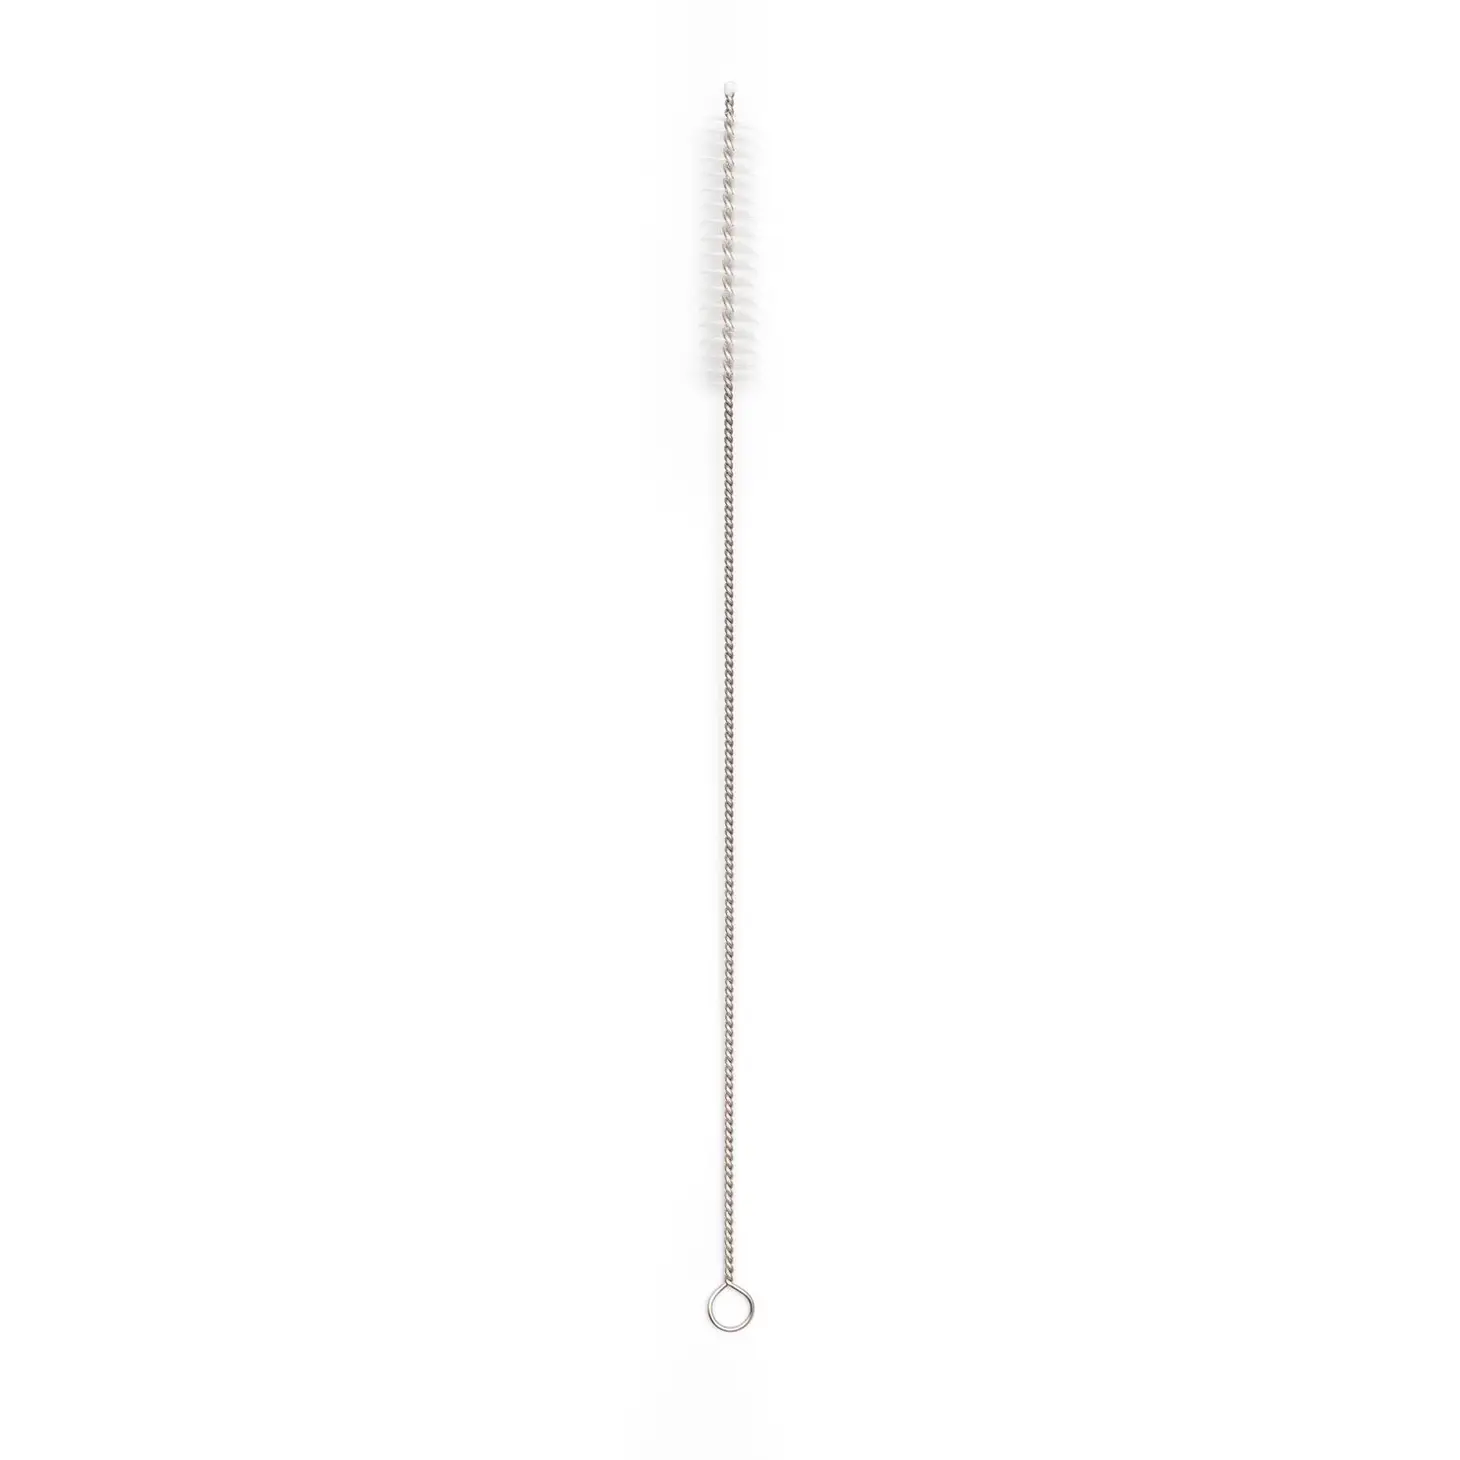 We Might Be Tiny - Stainless Steel Straw Brush